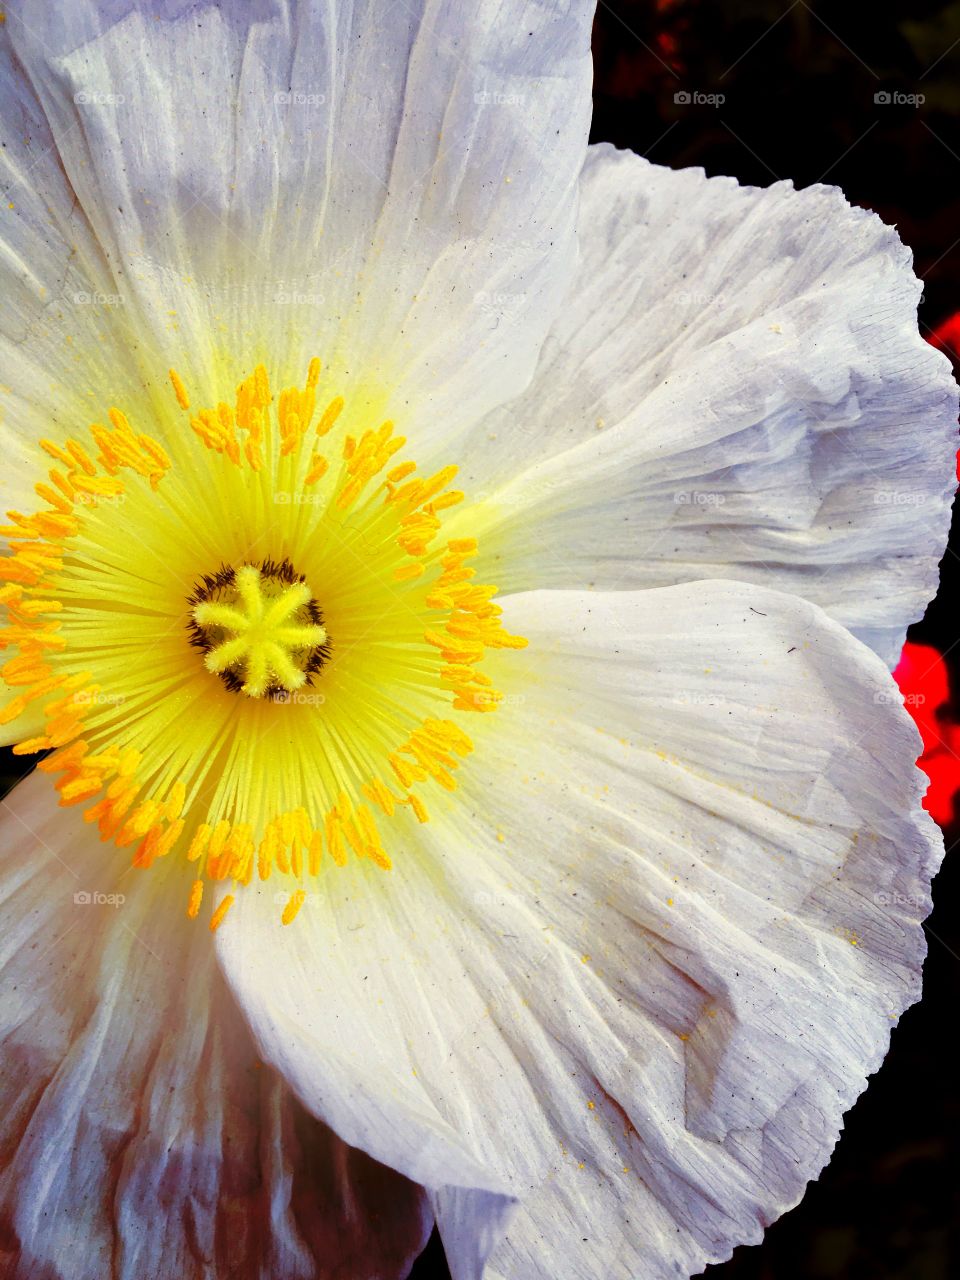 This is a photograph I captured of a delicate poppy flower. The fragility off the petals, and the vibrant colors really draw the eye in. I enjoy photographing flowers and nature in general. 